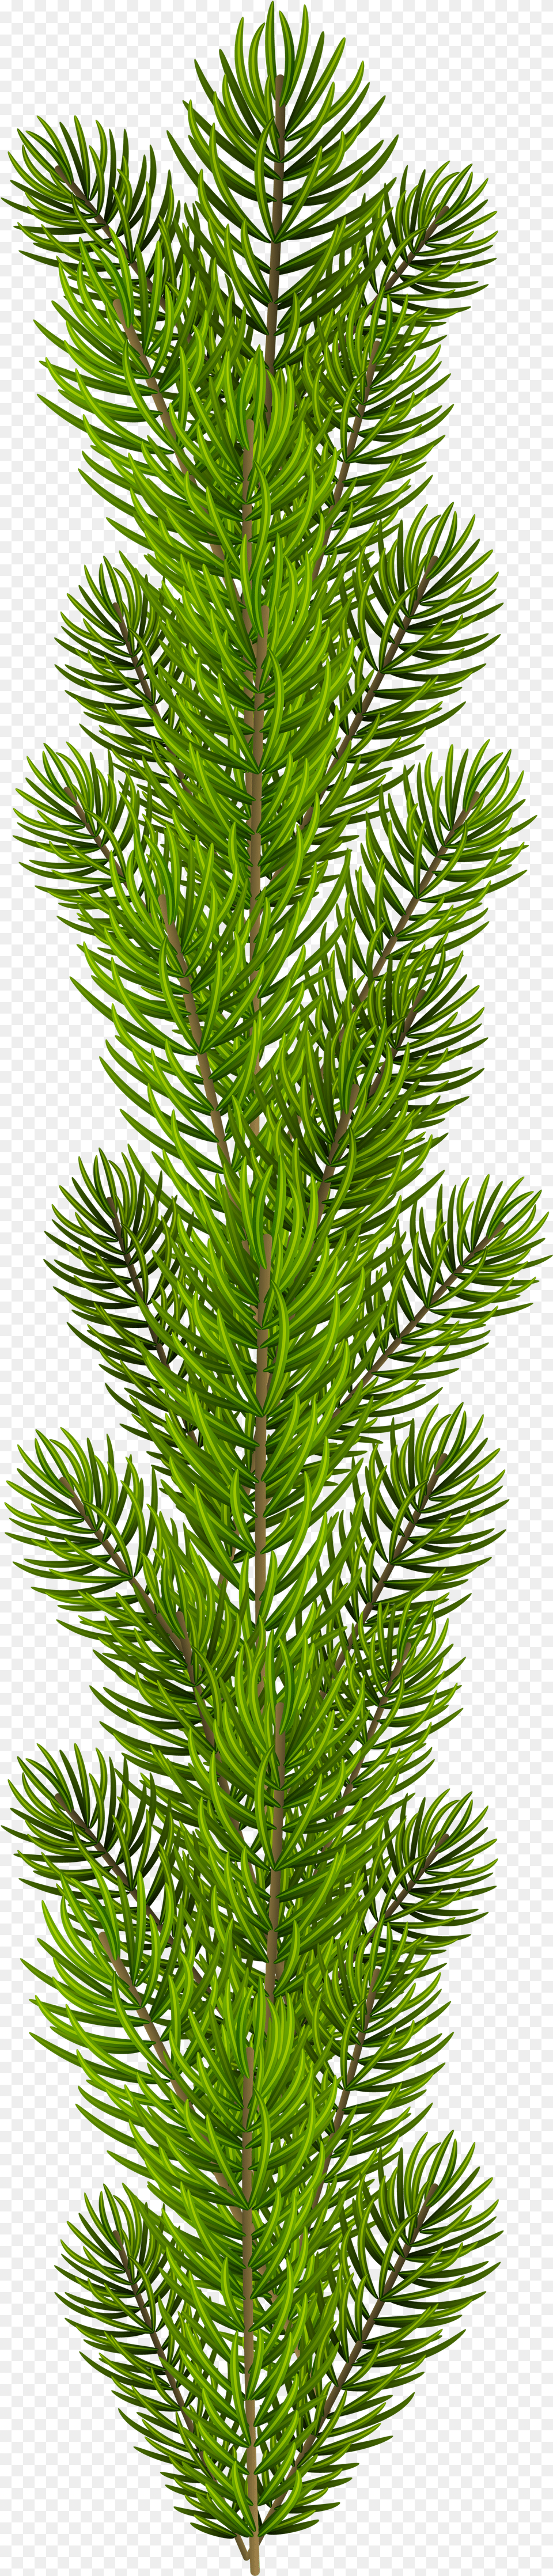 Transparent Pine Branches Clipart Pine Tree Branches Free Png Download